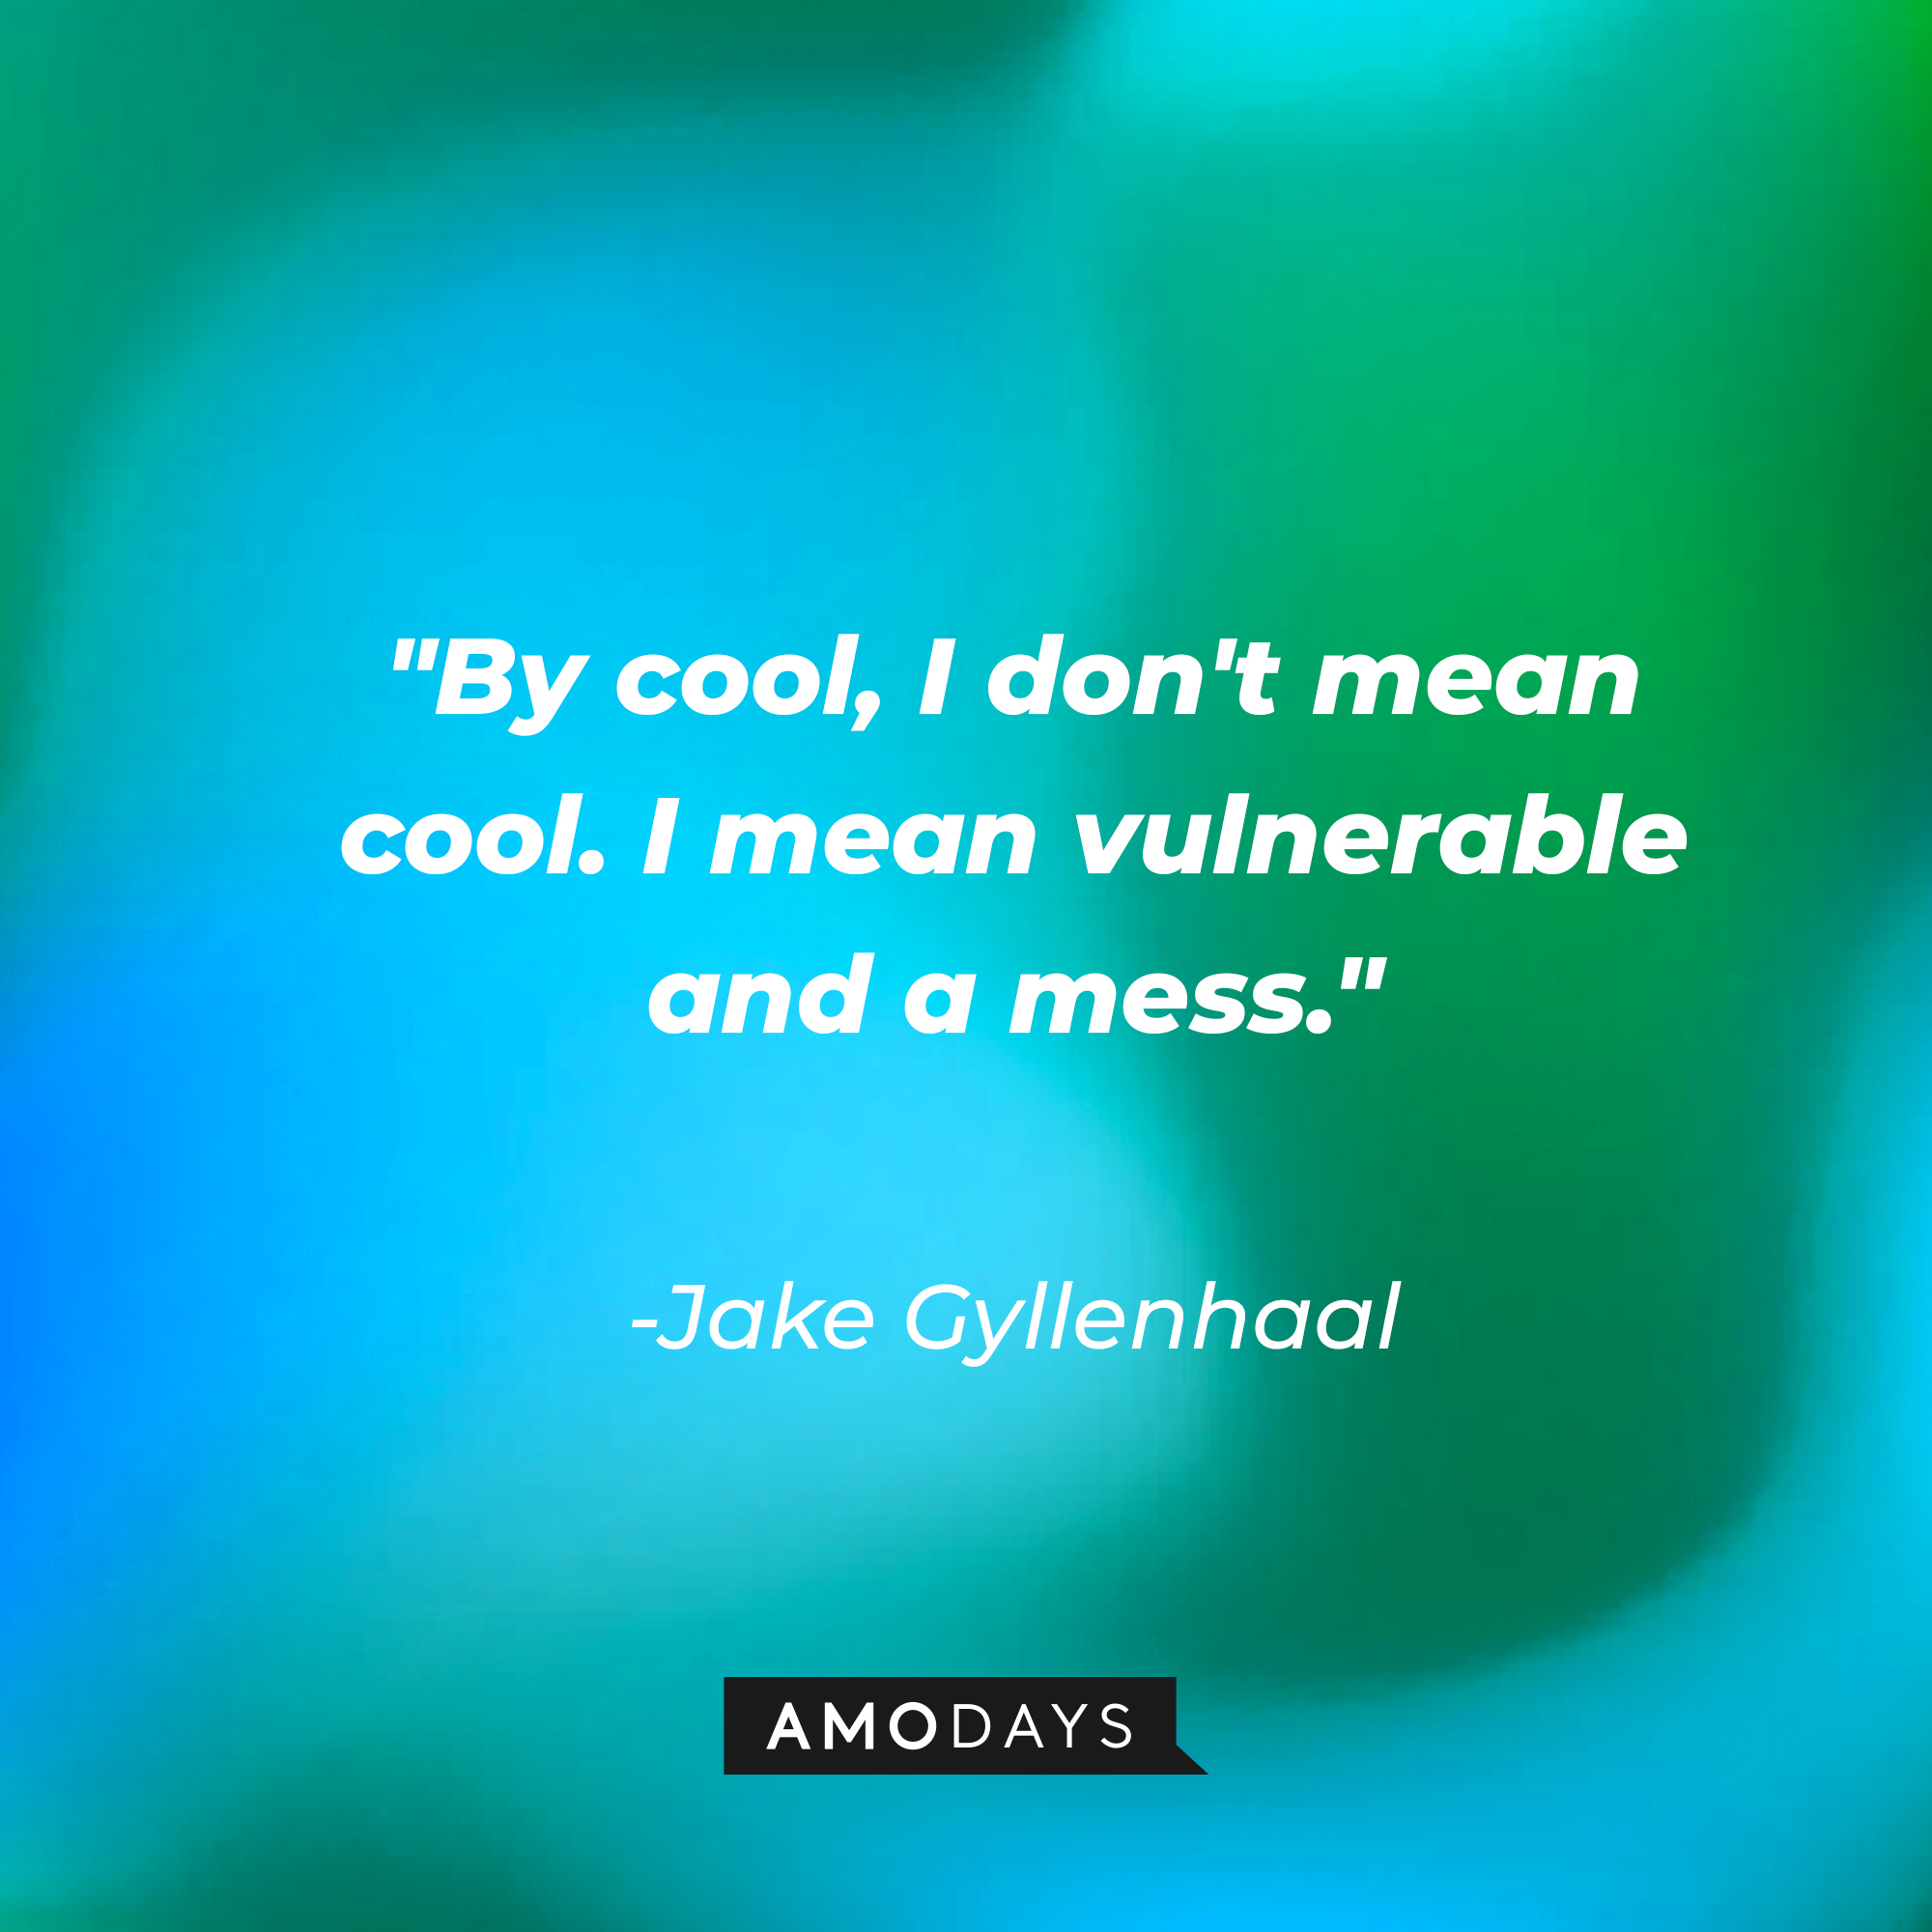 Jake Gyllenhaal's quote: "By cool, I don't mean cool. I mean vulnerable and a mess." | Source: AmoDays